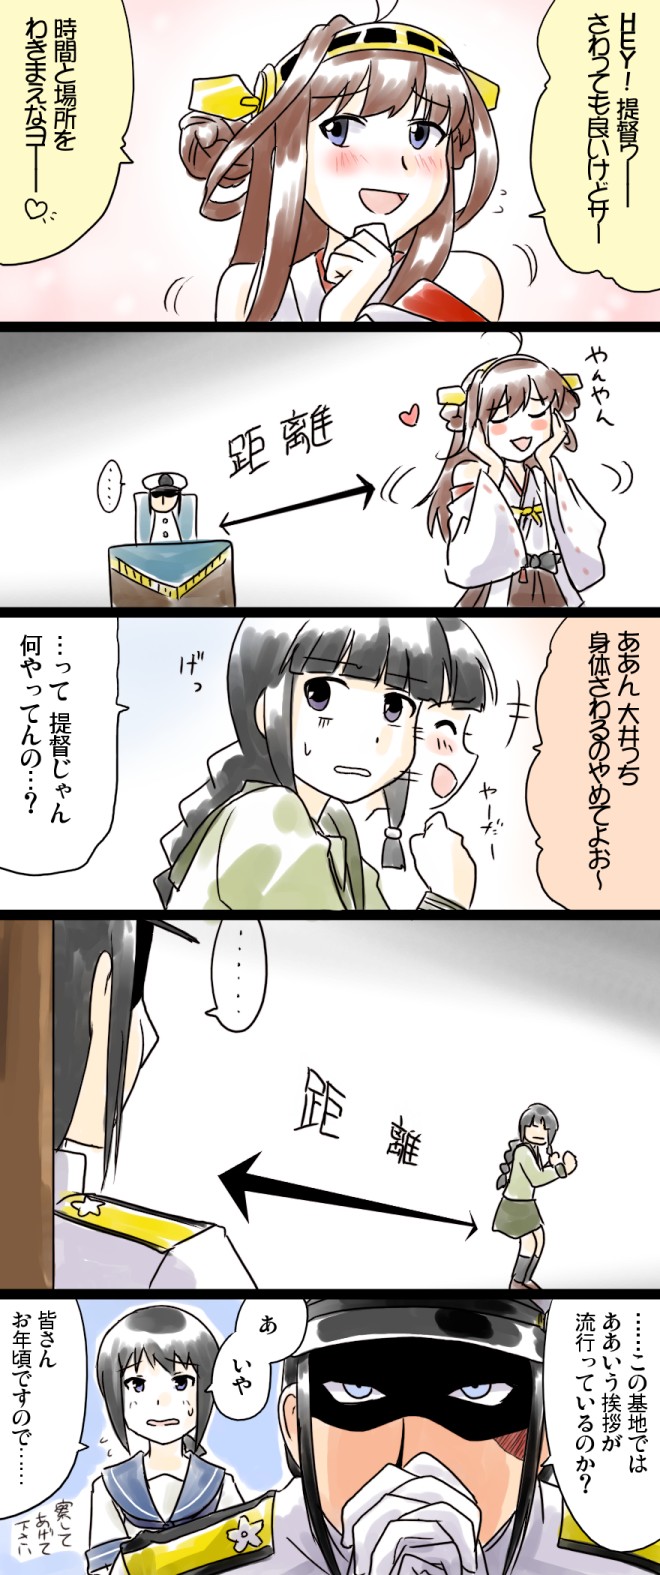 4girls bare_shoulders brown_hair comic detached_sleeves female_admiral_(kantai_collection) fubuki_(kantai_collection) hairband hat highres it's_ok_to_touch japanese_clothes kantai_collection kitakami_(kantai_collection) kongou_(kantai_collection) long_hair military military_uniform multiple_girls naval_uniform partially_translated school_uniform shaded_face spoken_ellipsis supon translation_request uniform